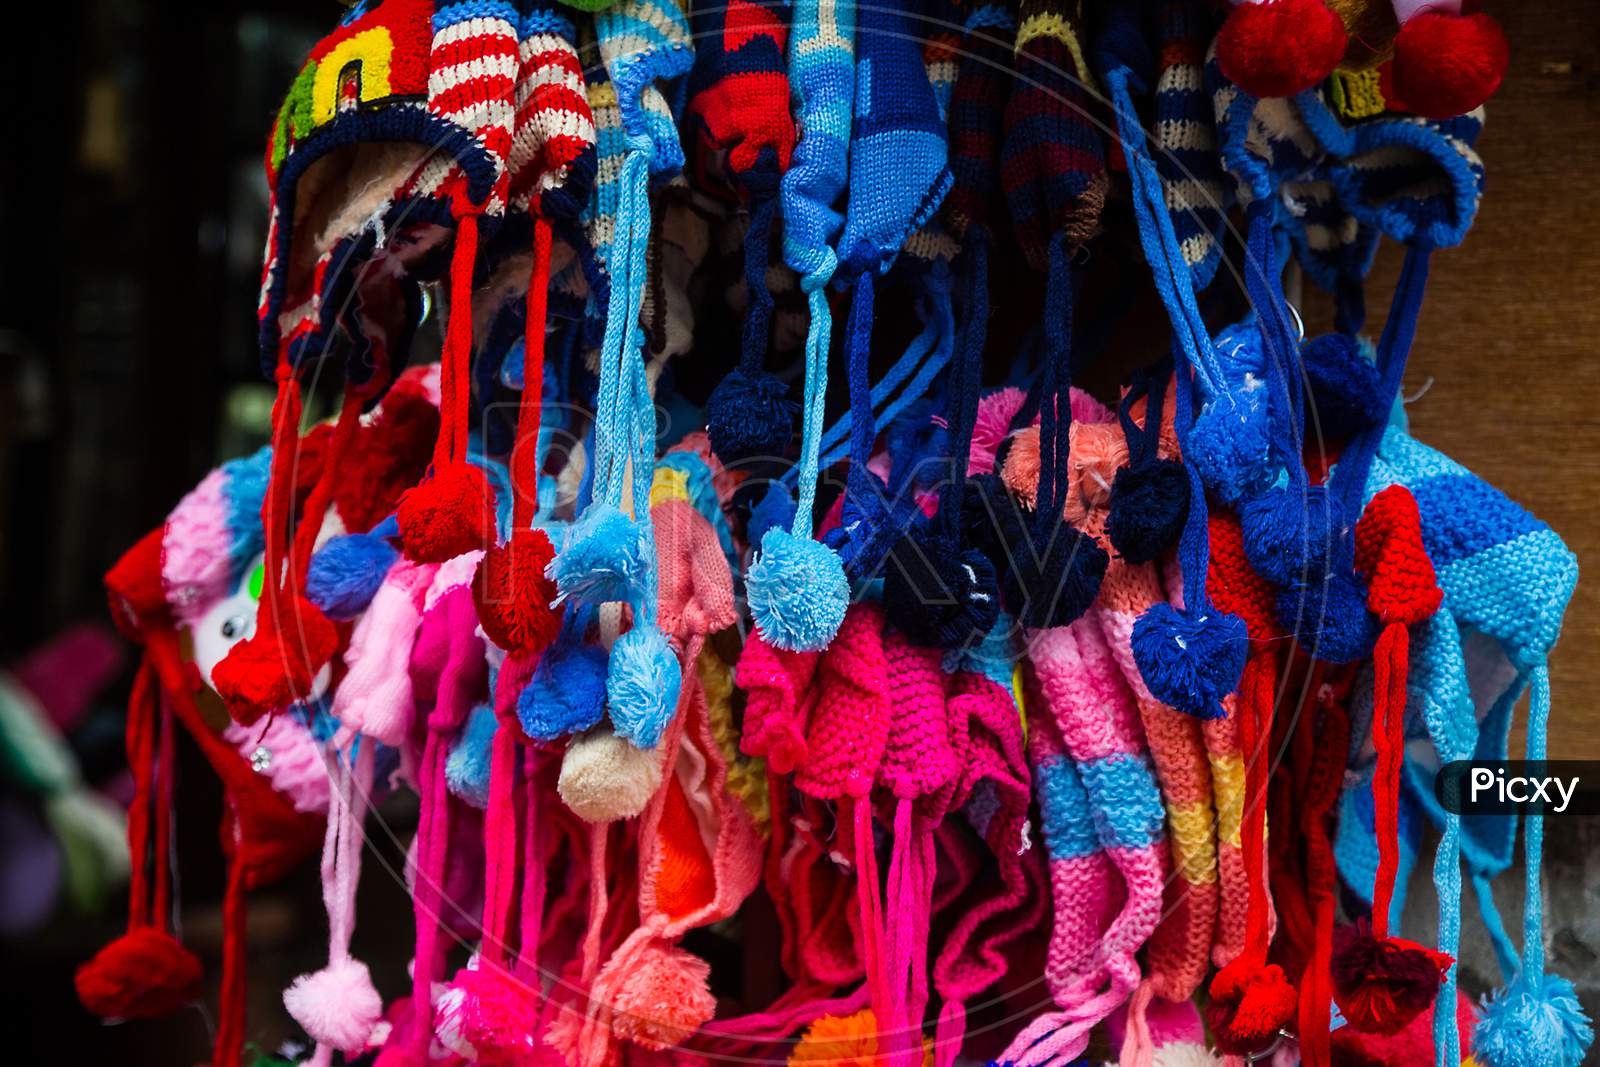 Colorful Knitted Winter Caps And Scarfs Hanging Outside The Shop, Background, Market - Image